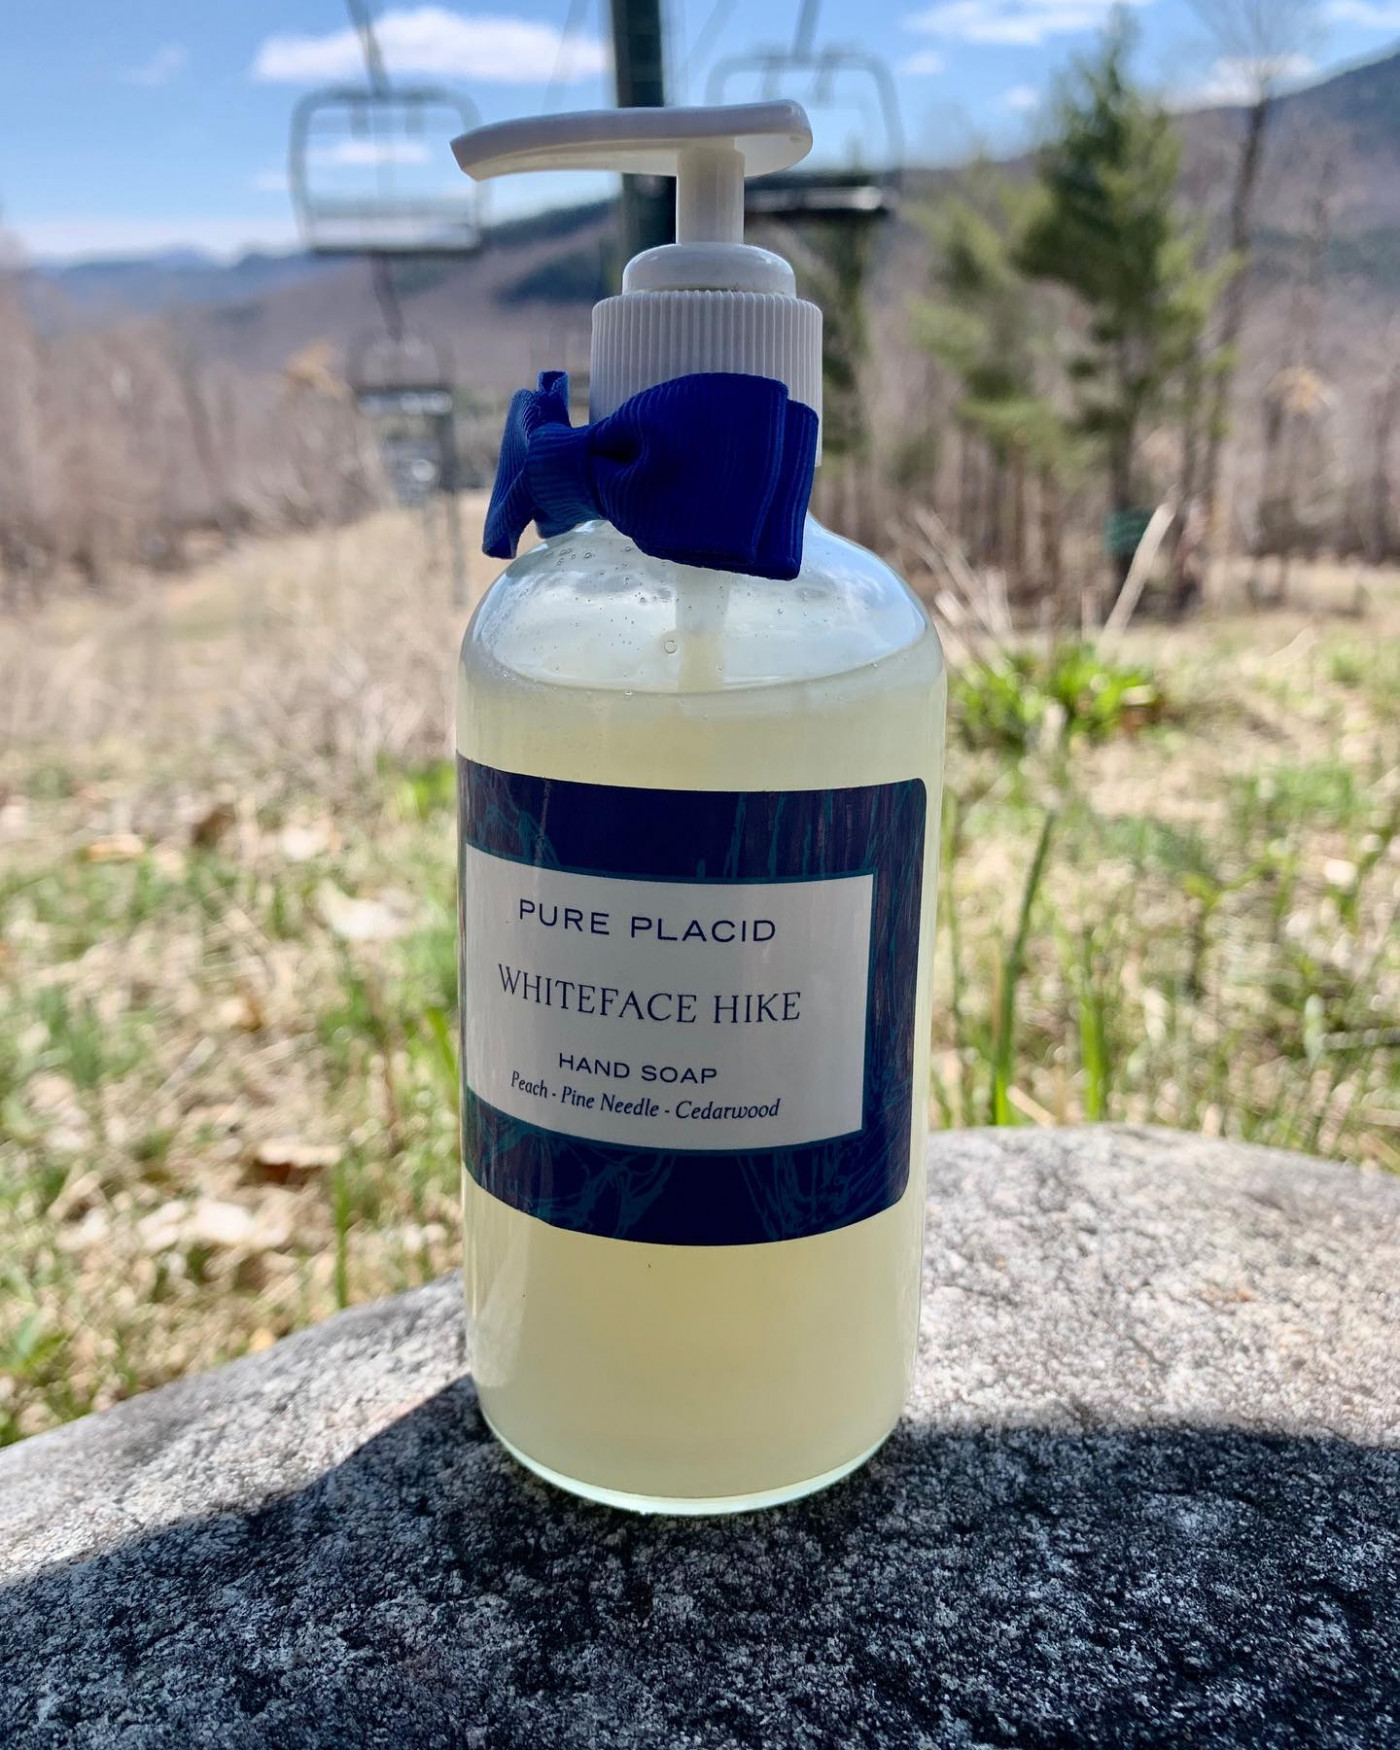 A Pure Placid product inspired by the Adirondacks